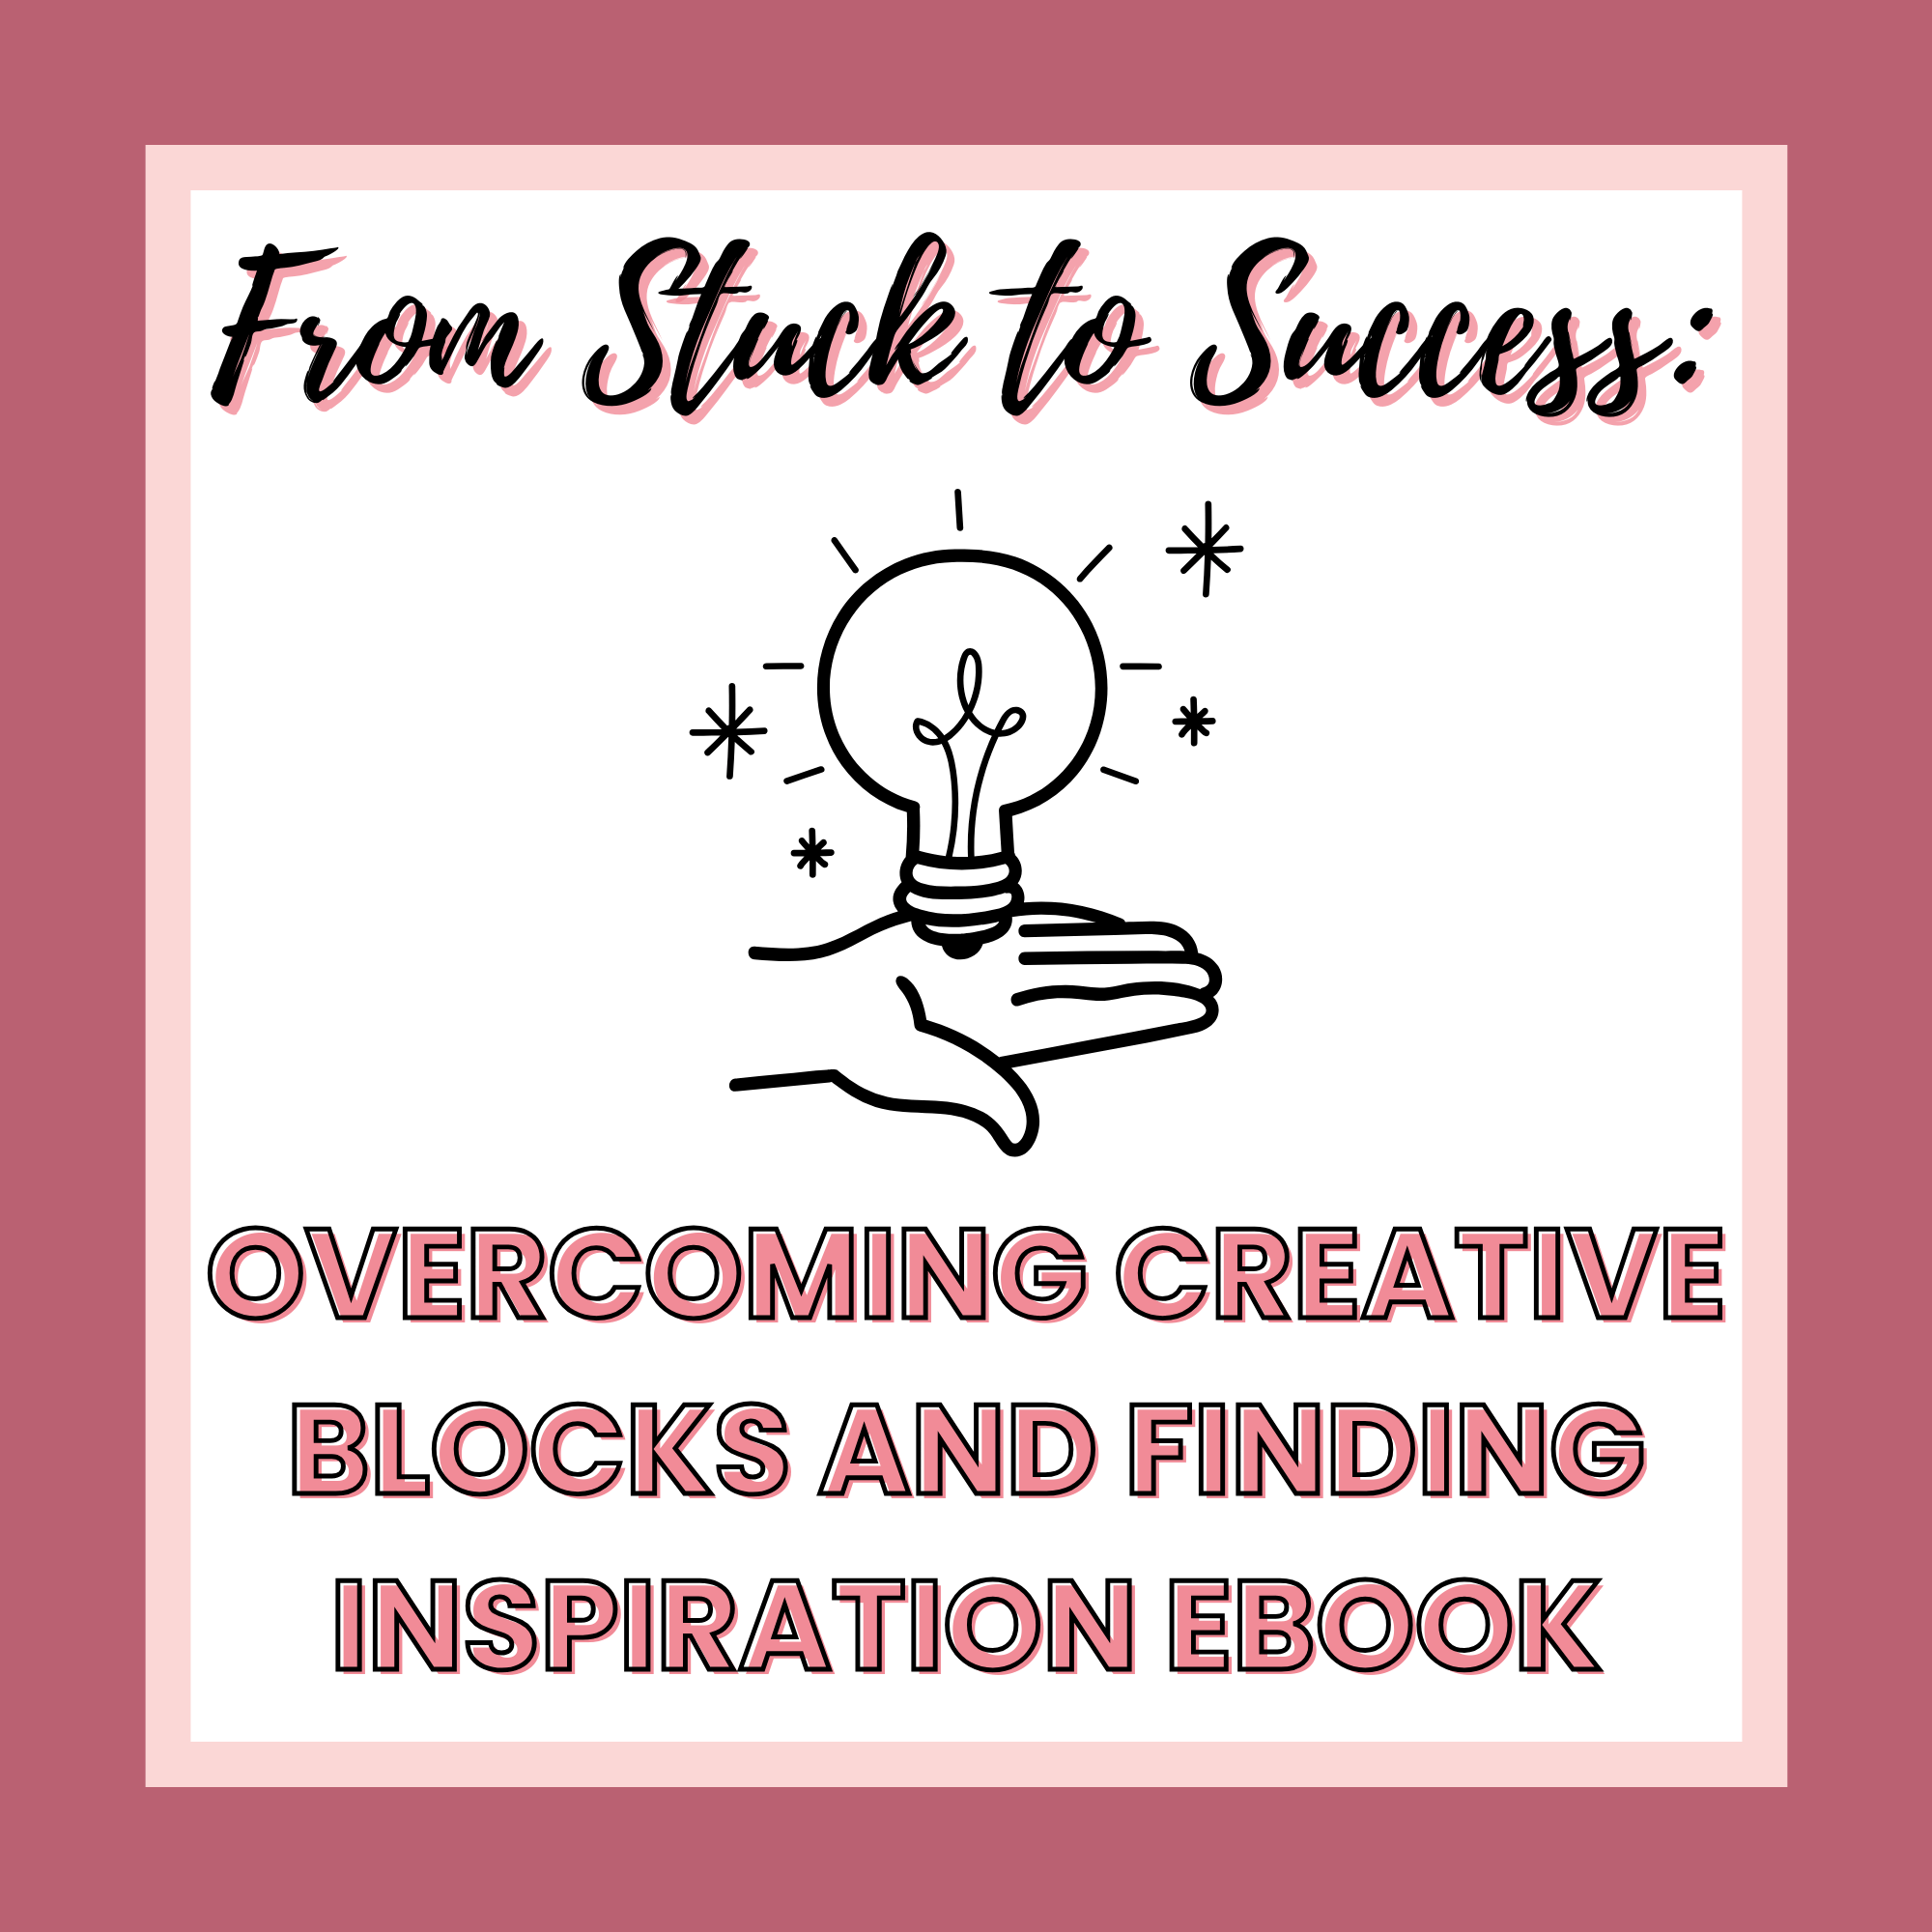 Cover of an eBook titled "From Stuck to Success: Overcoming Creative Blocks and Finding Inspiration." The cover features a hand holding a glowing light bulb and text on a red and white background.